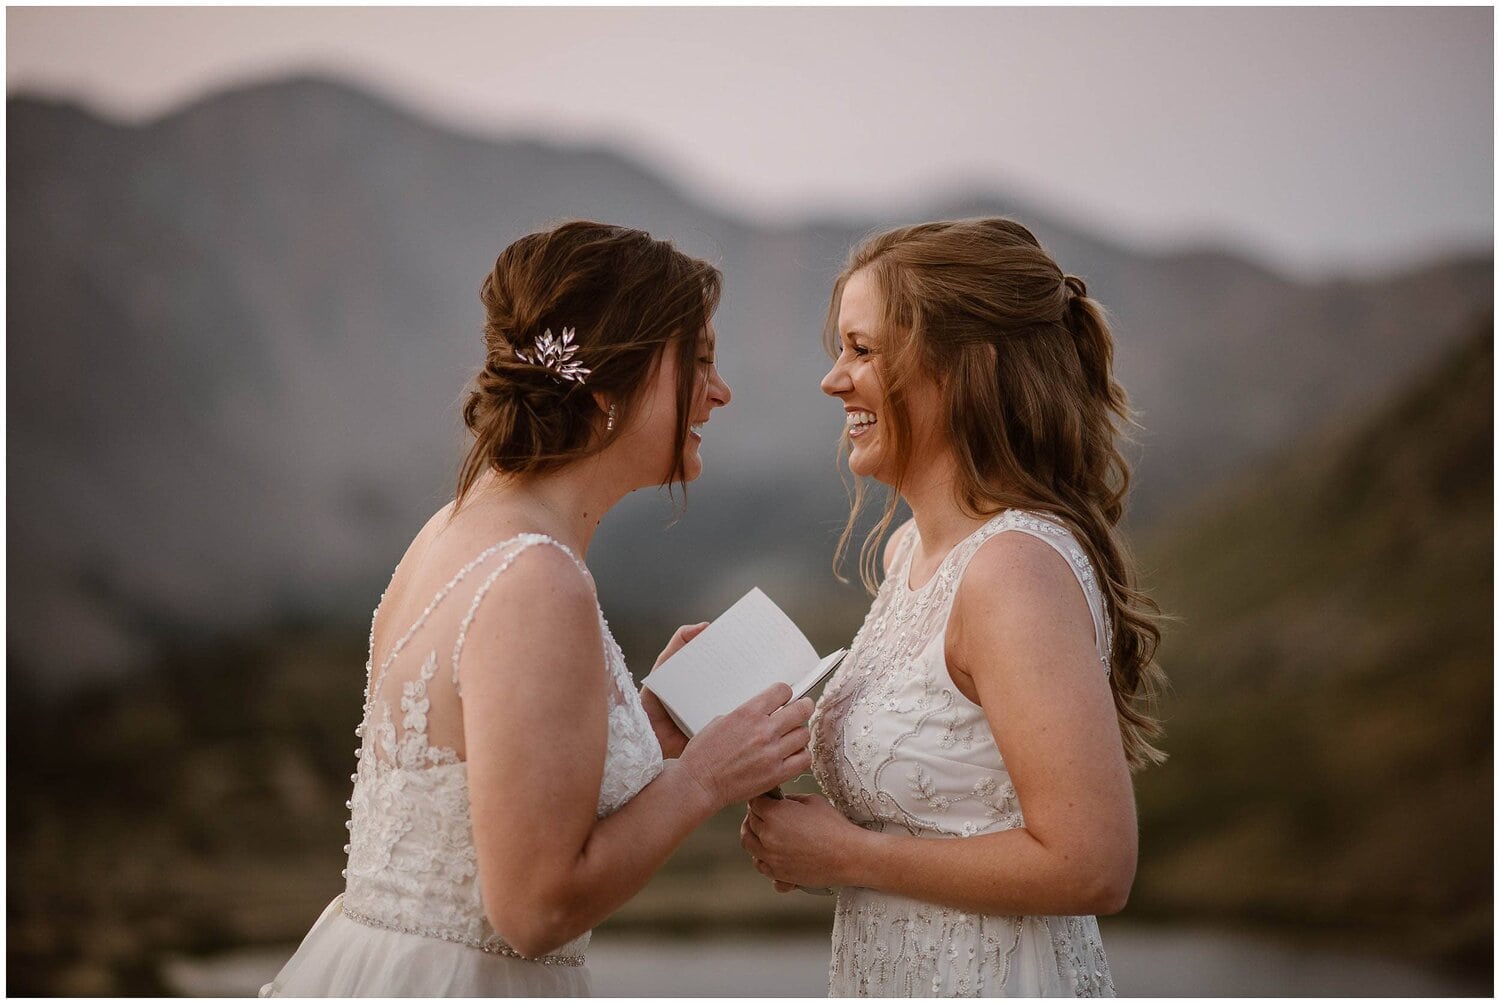 Two brides laugh while exchanging vows.